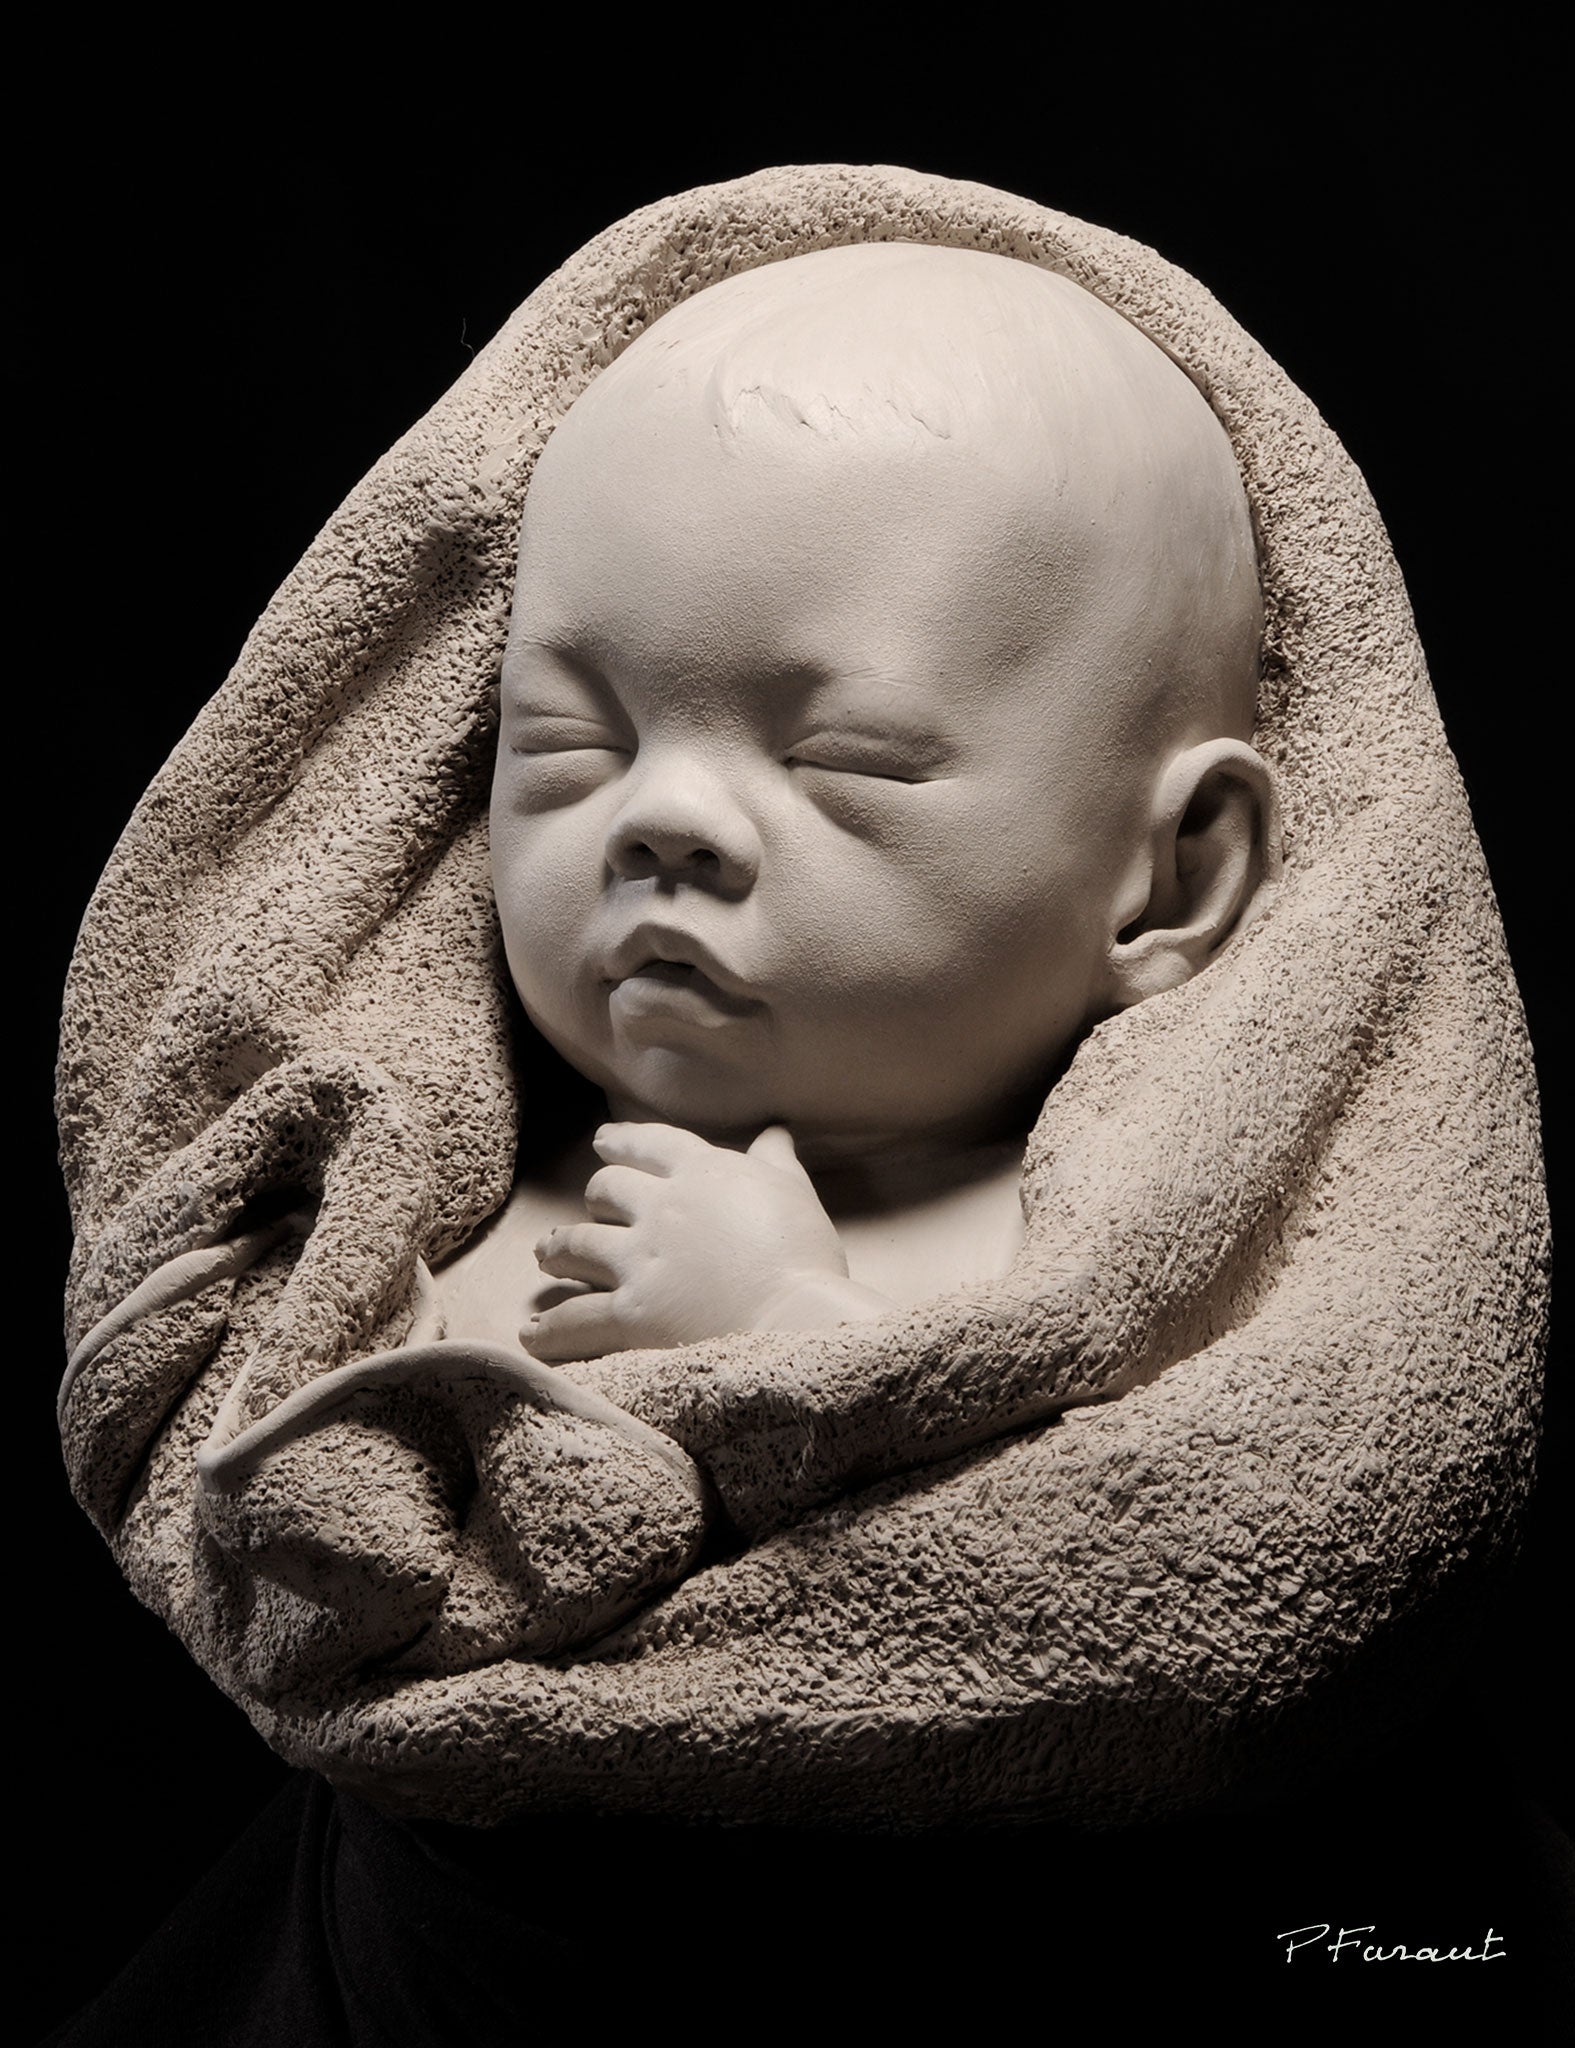 portrait sculpture of sleeping baby wrapped in terry cloth towel by Phlippe Faraut